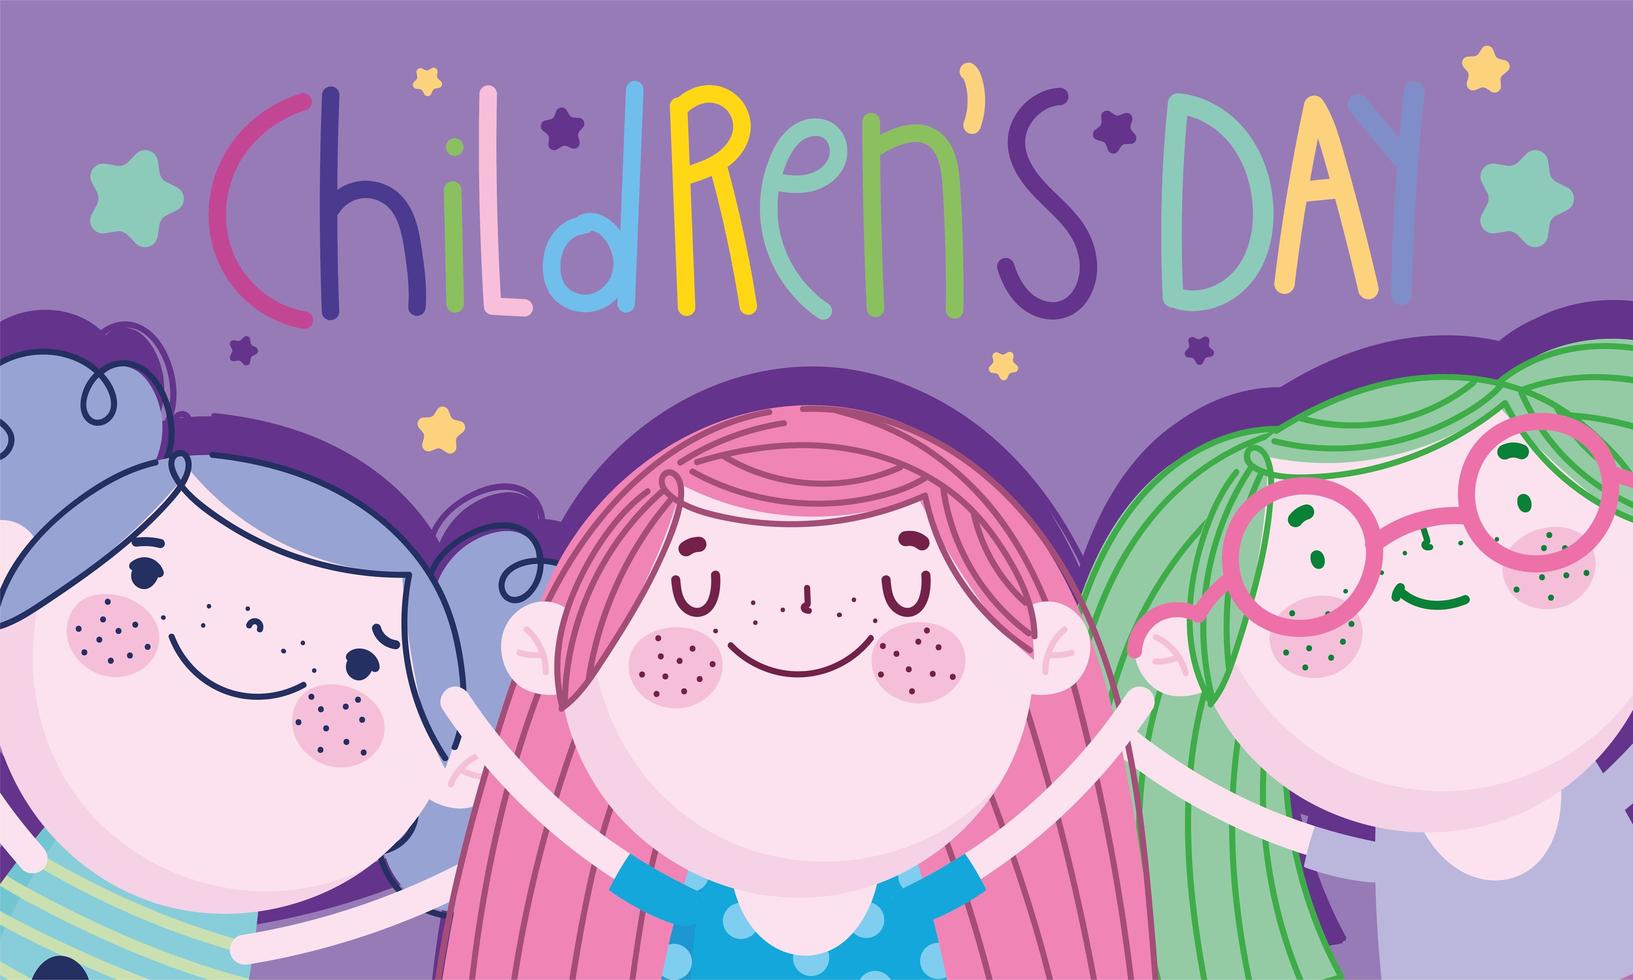 childrens day, cartoon happy little girls characters card vector